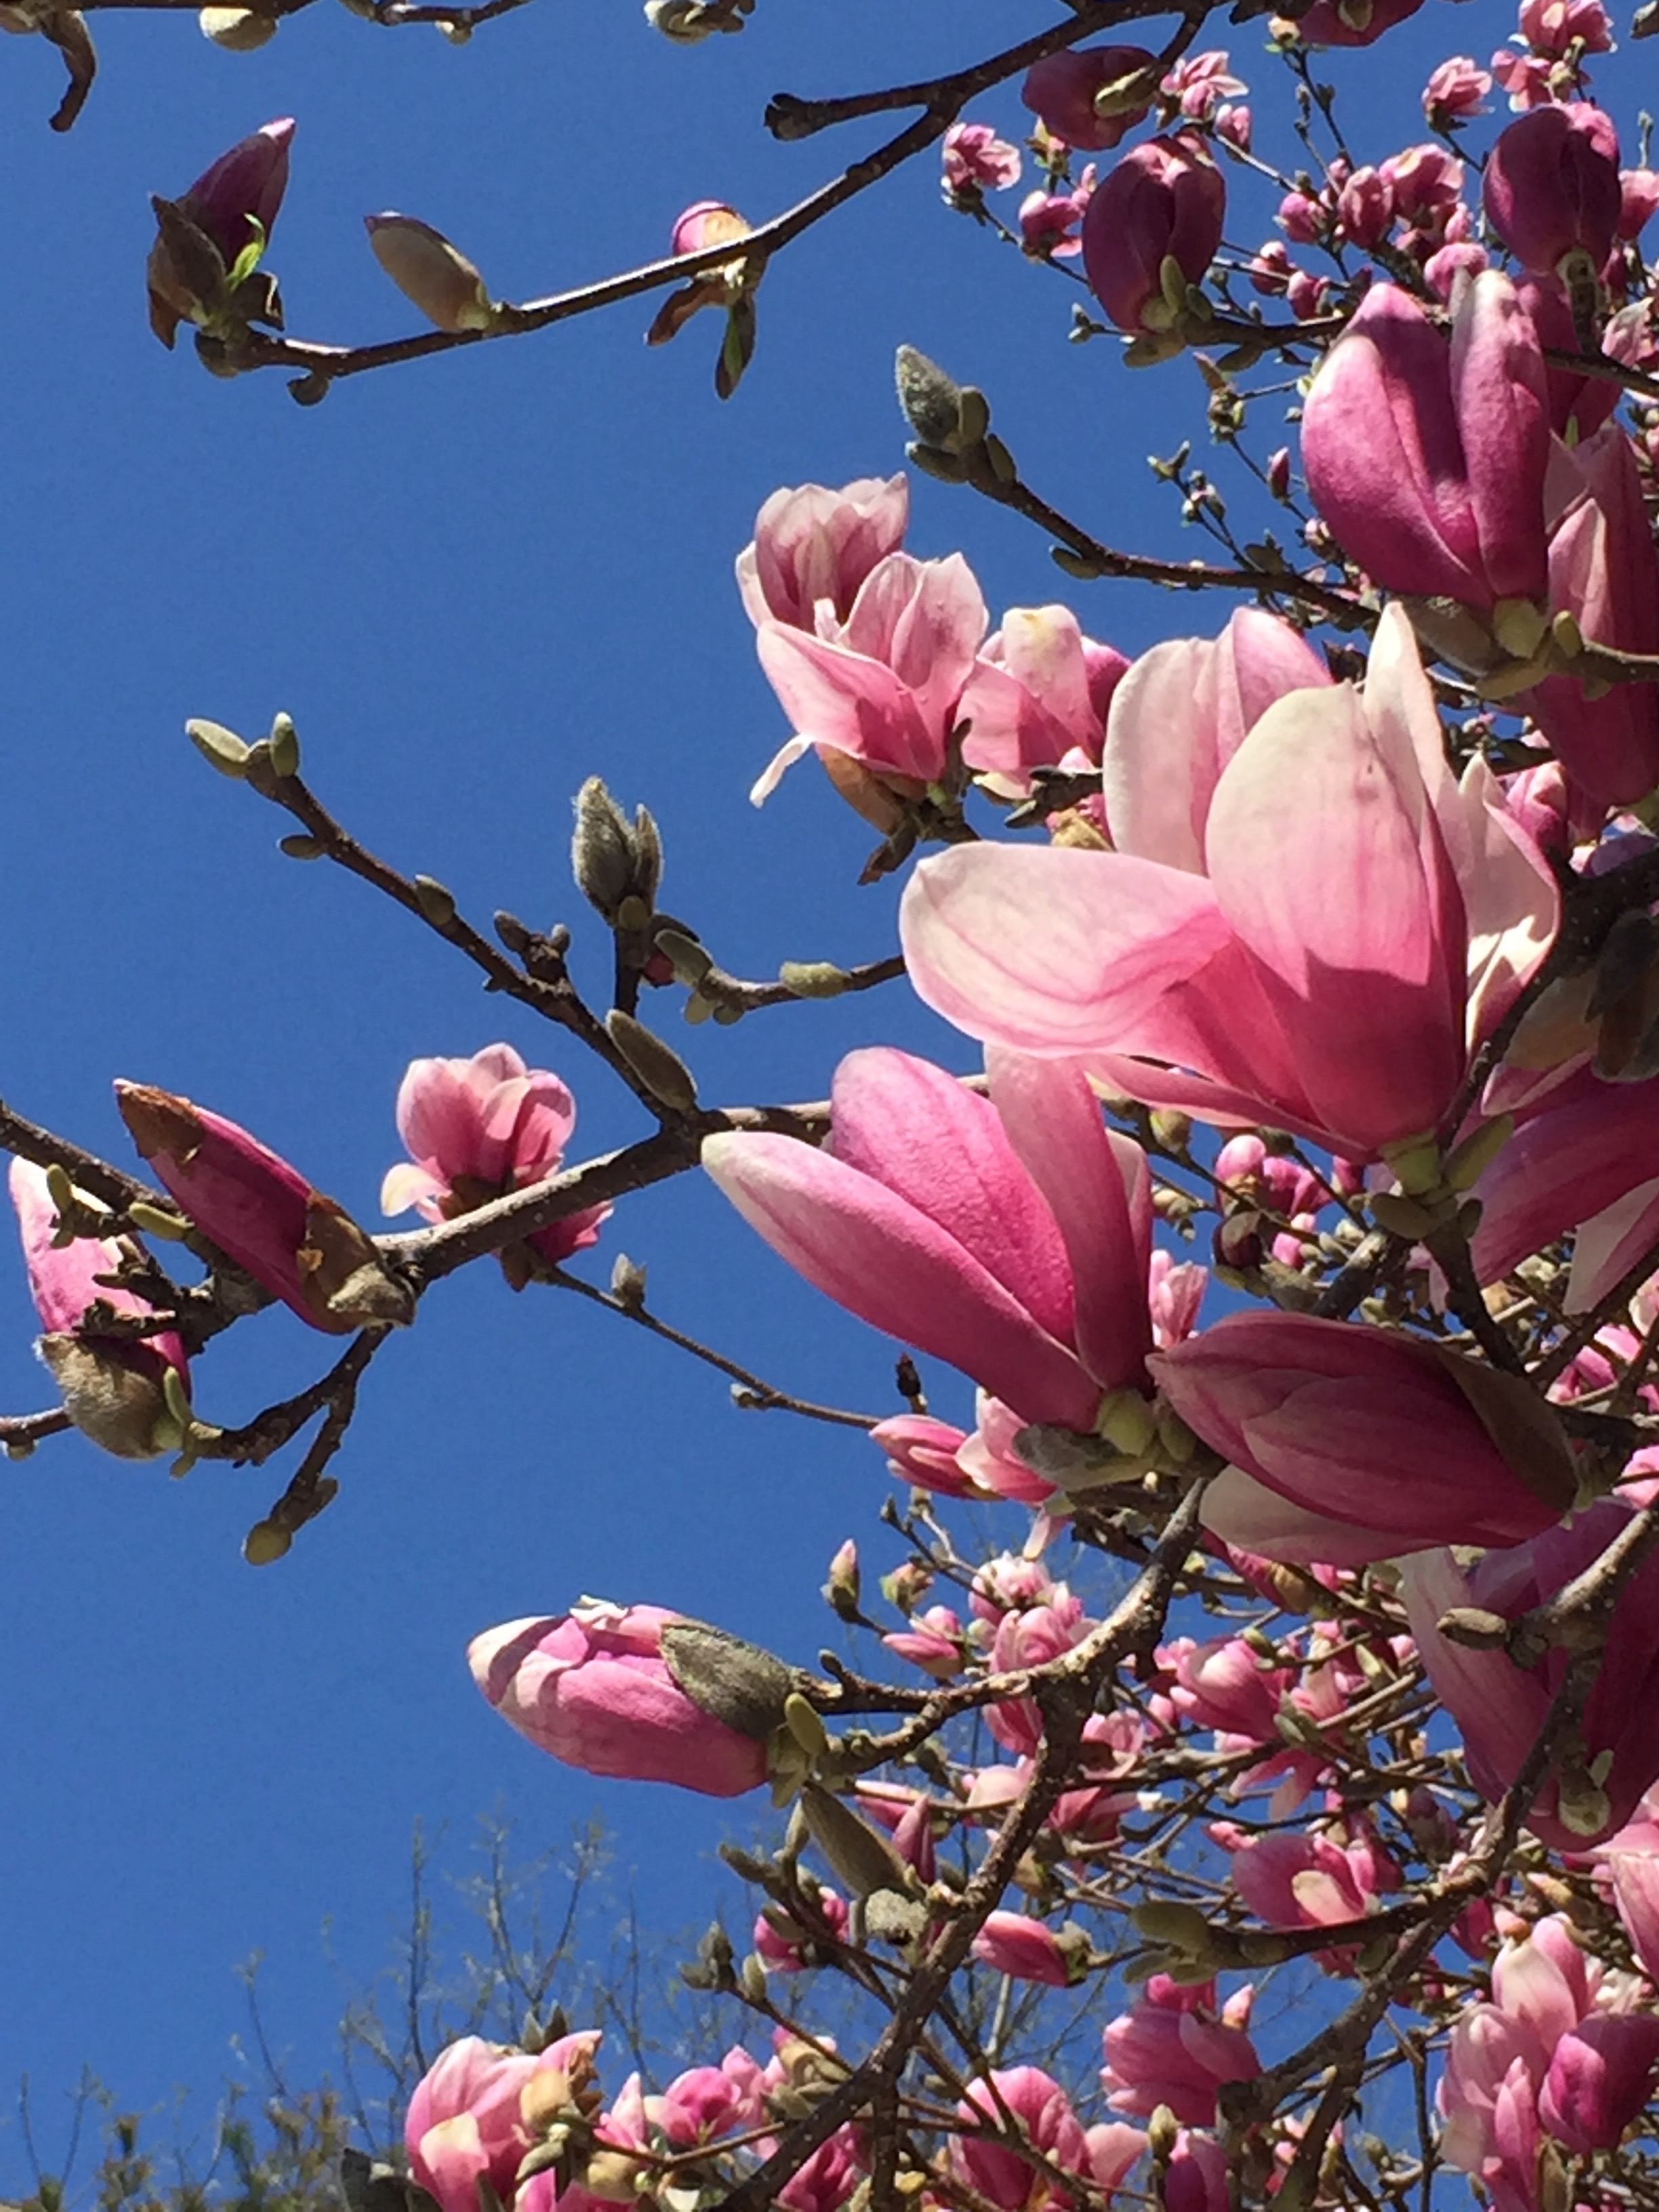 It's the weekend! Number 54, Magnolia Blossoms Against a Brilliant Blue Sky